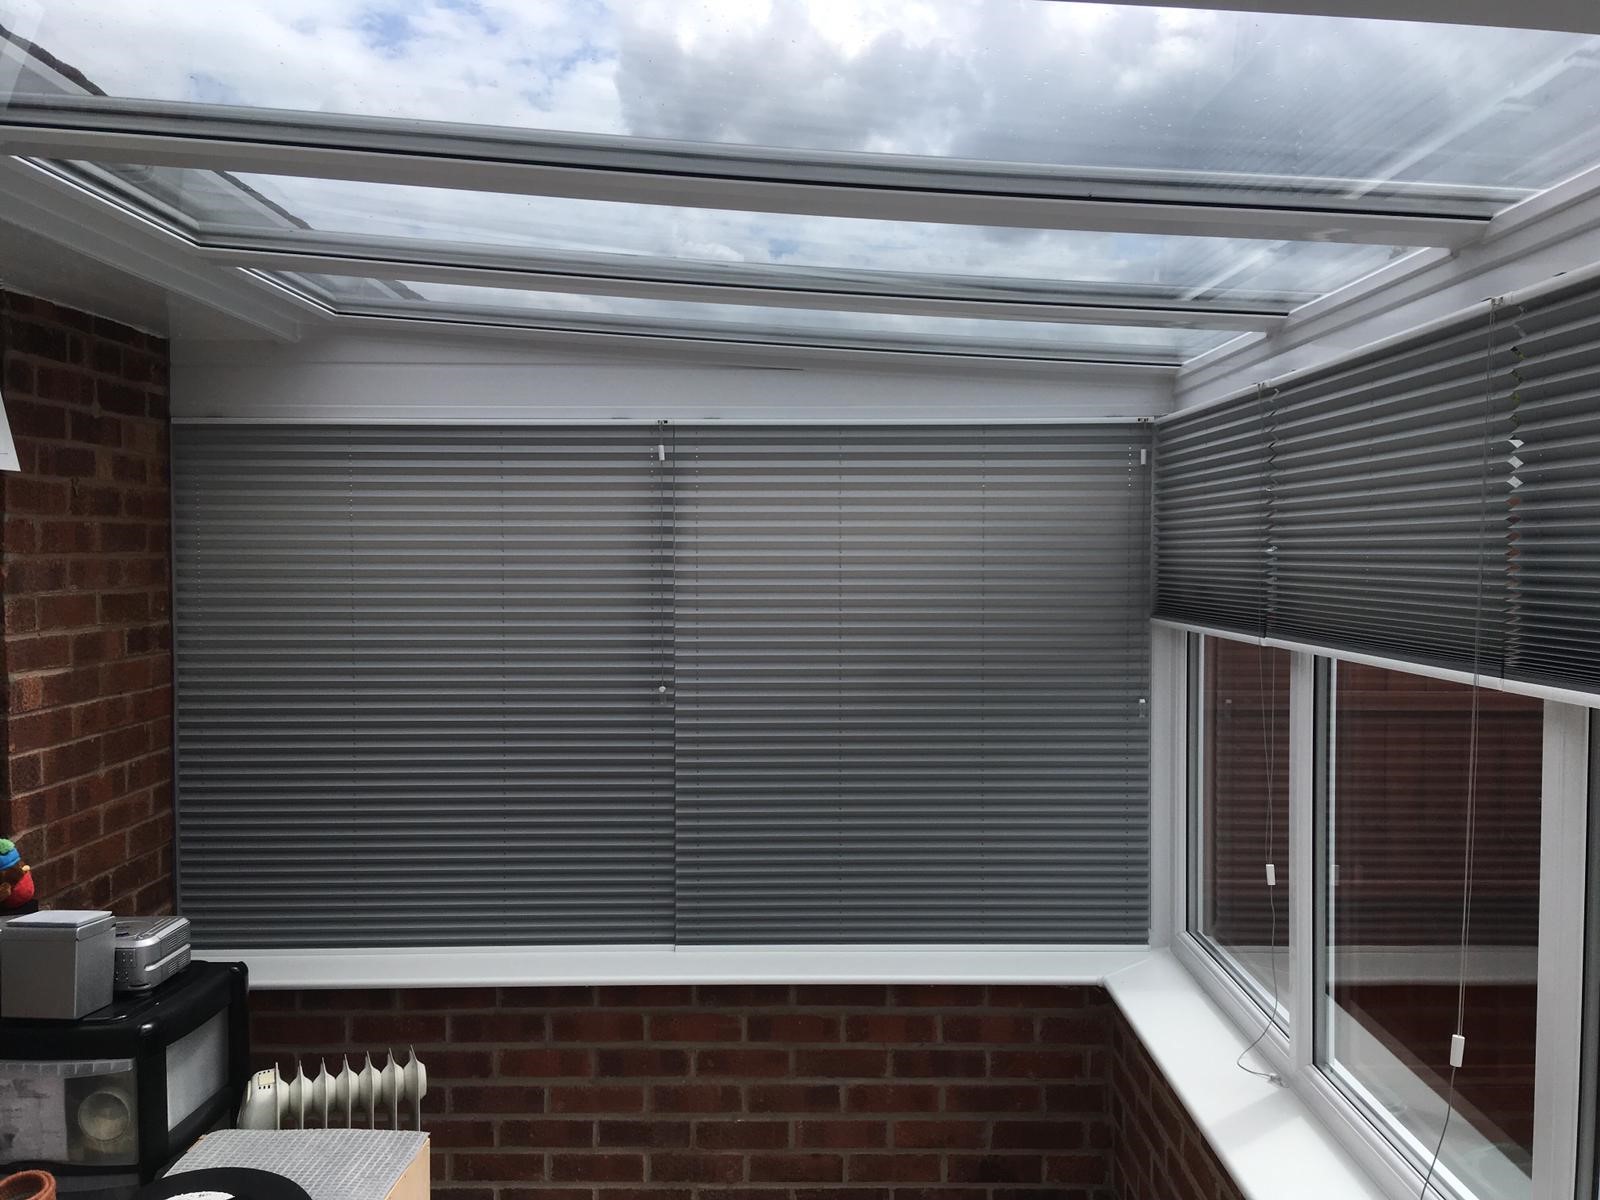 Suppliers of Pleated Blinds For Hot Summers UK